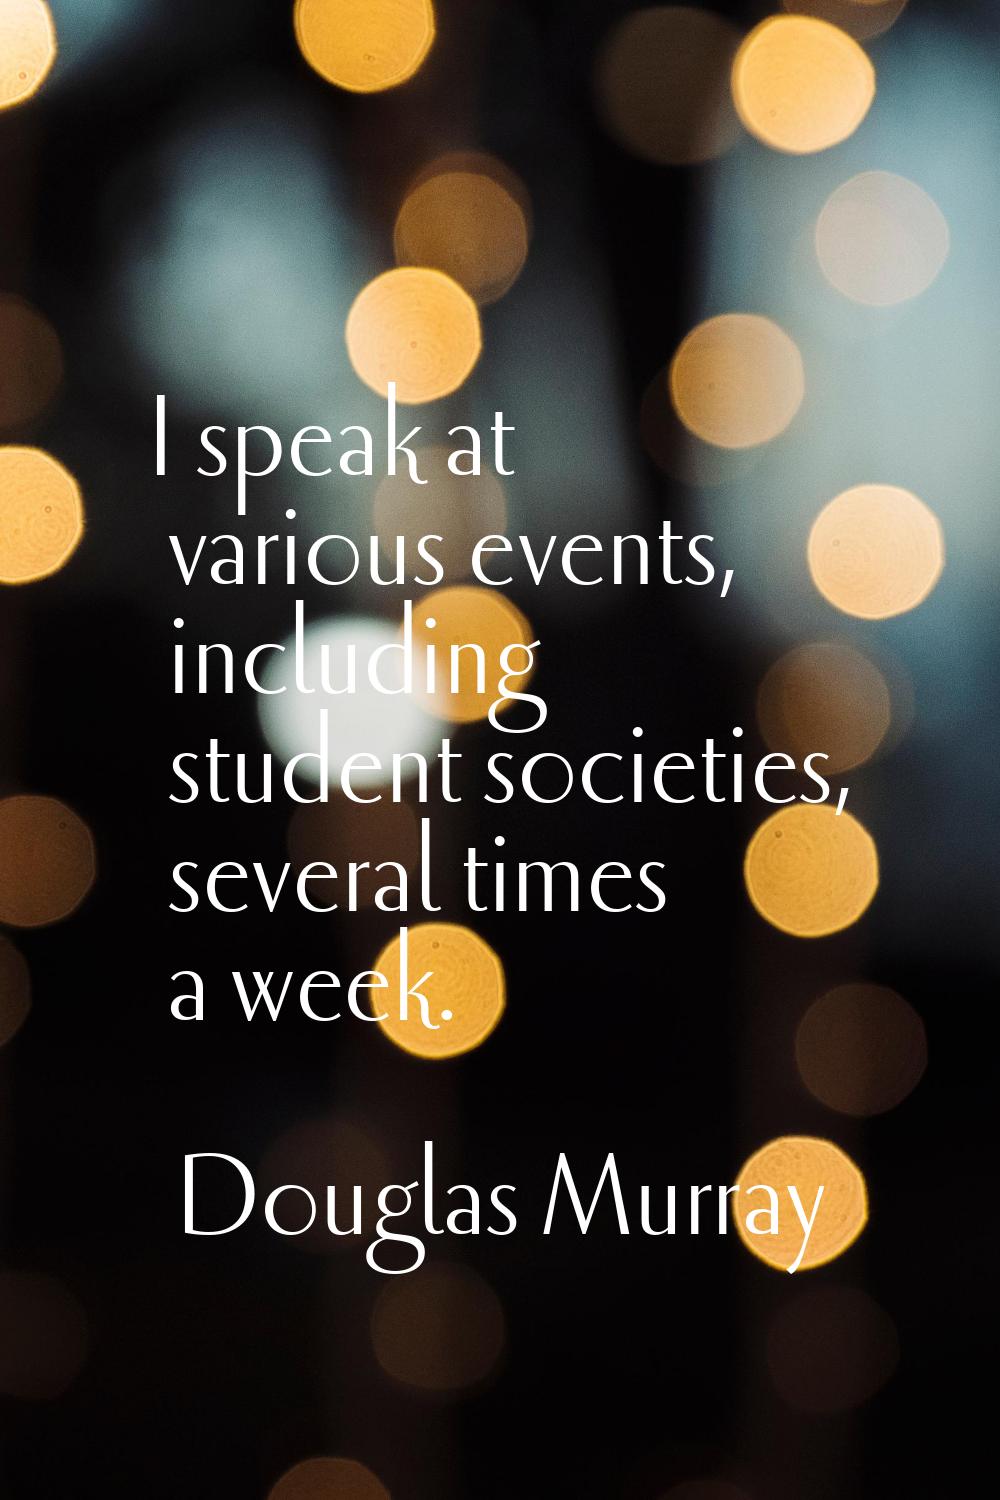 I speak at various events, including student societies, several times a week.